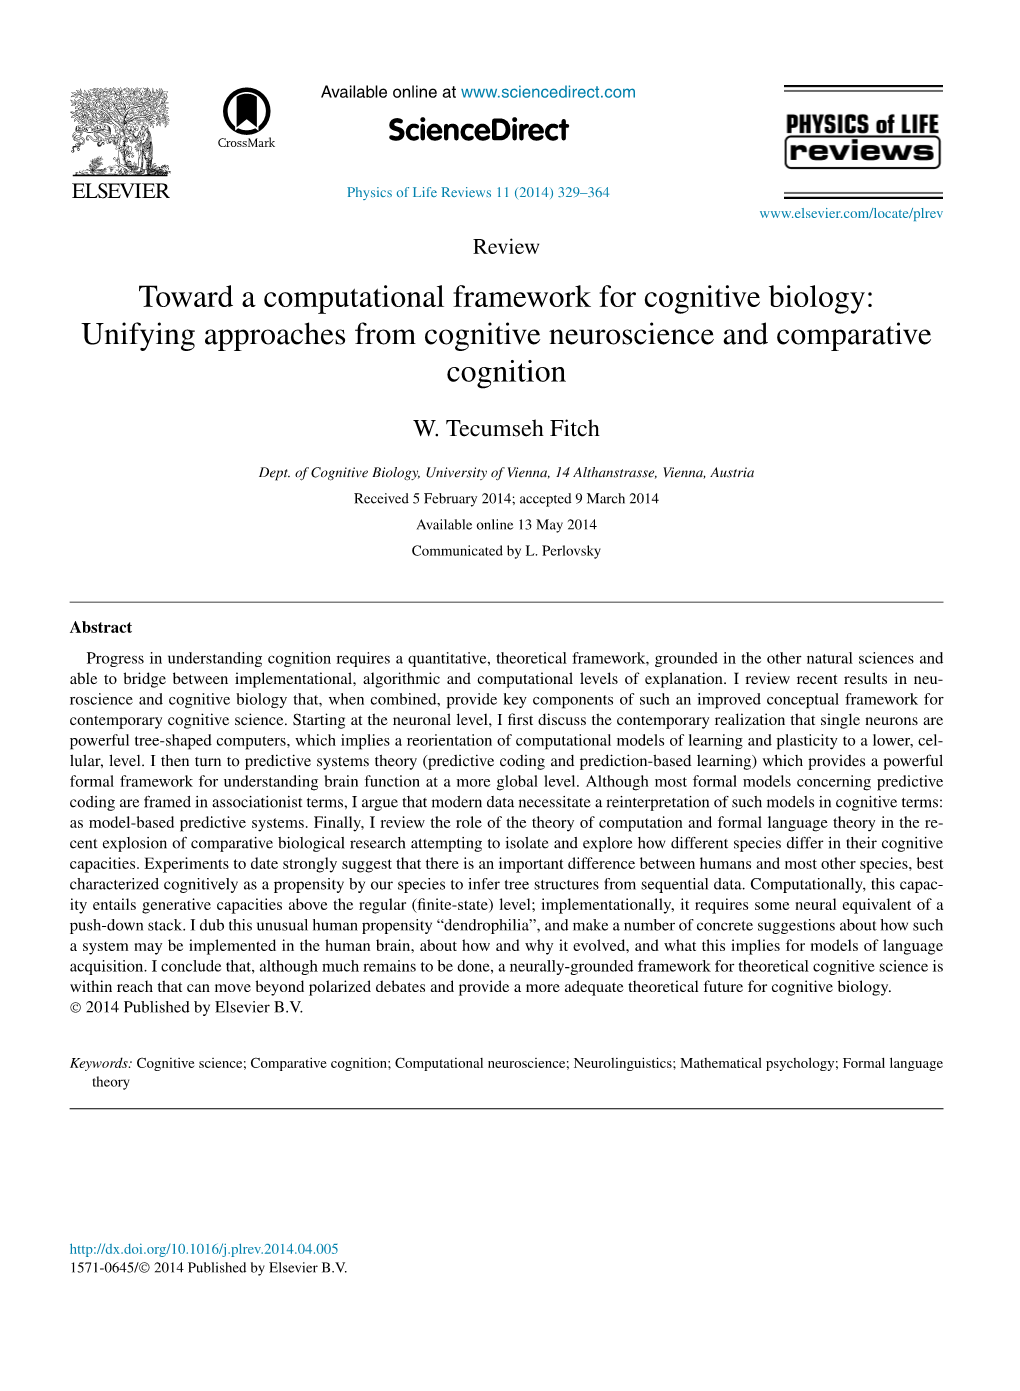 Unifying Approaches from Cognitive Neuroscience and Comparative Cognition